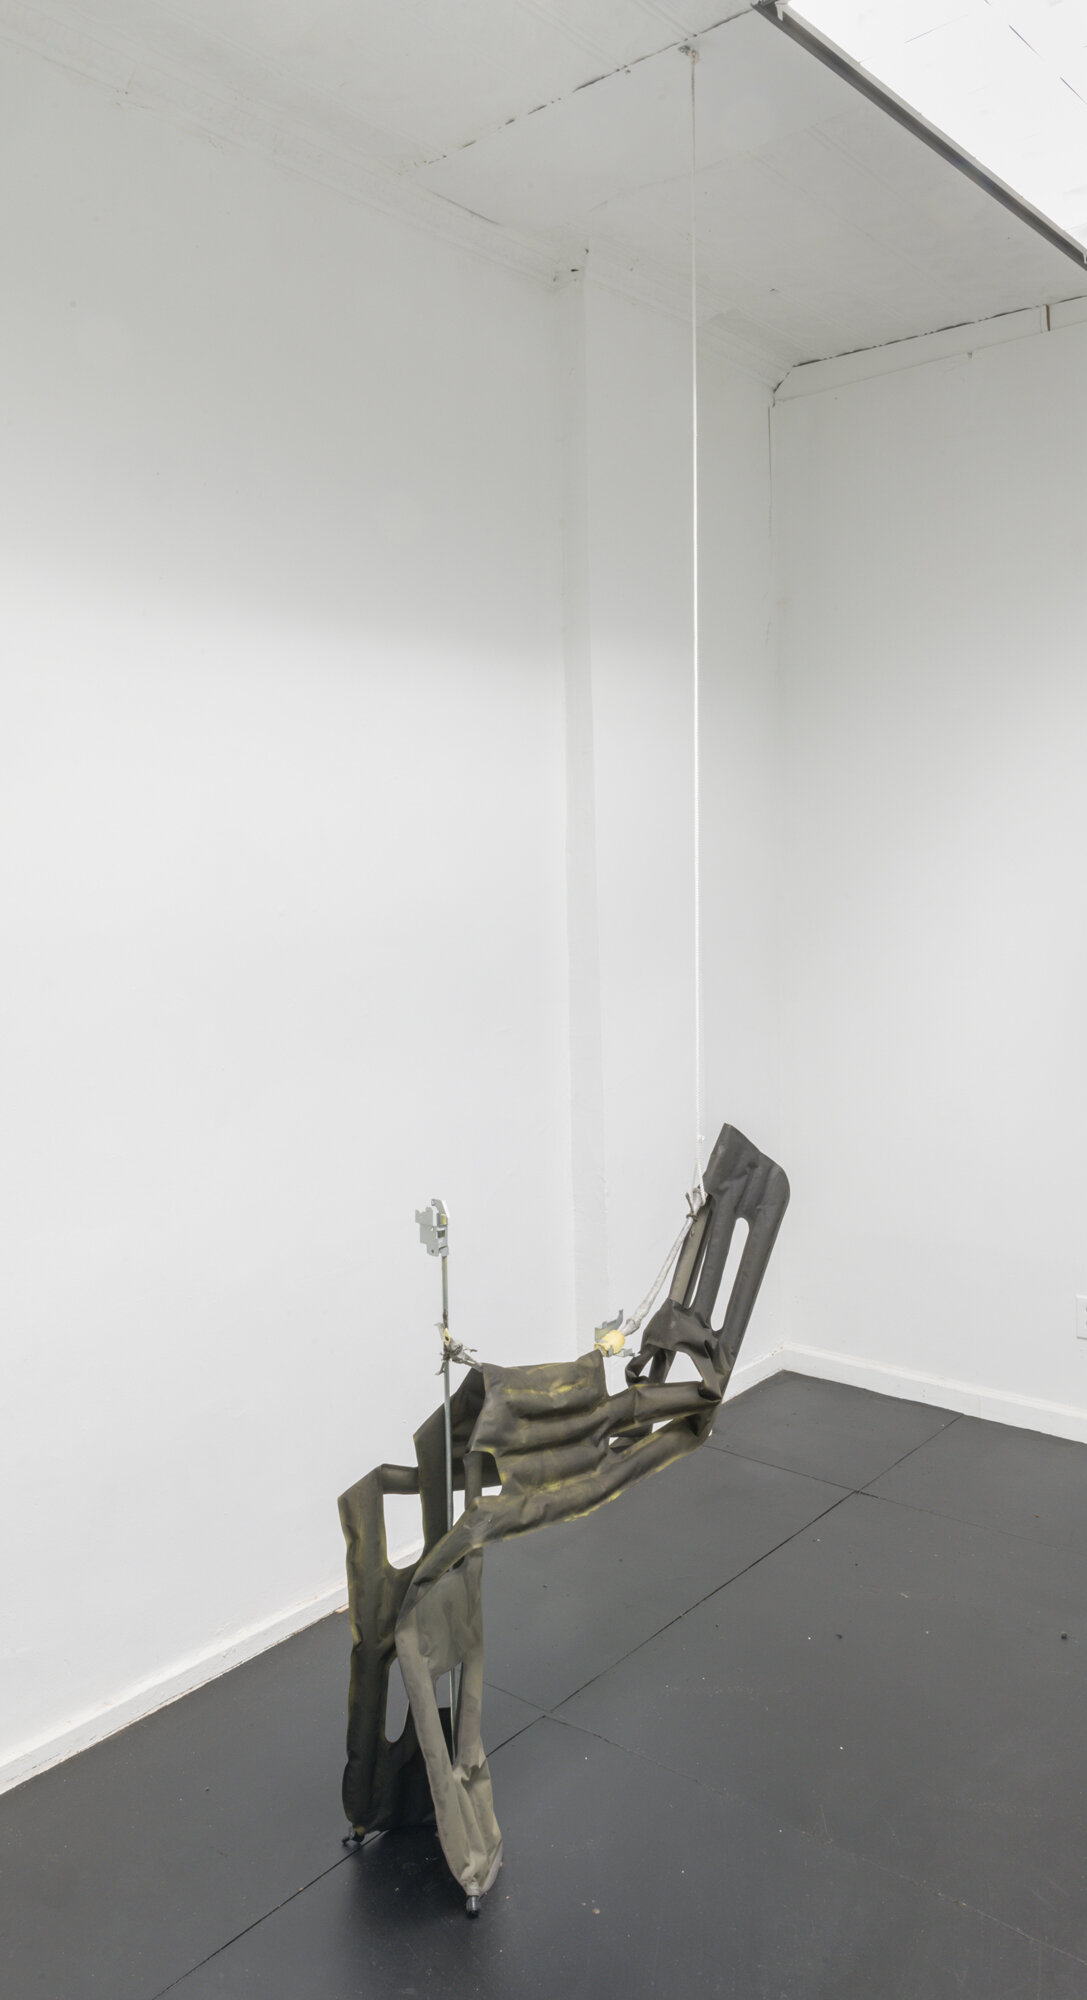  Bryce Kroll,  Suspended inflatable, curvilinear tube, vertical rod,  2021. Inflatable sleeping mat, plastic, threaded rod, aluminum hardware, rope, silicone. 43 x 39 x 10 inches. 